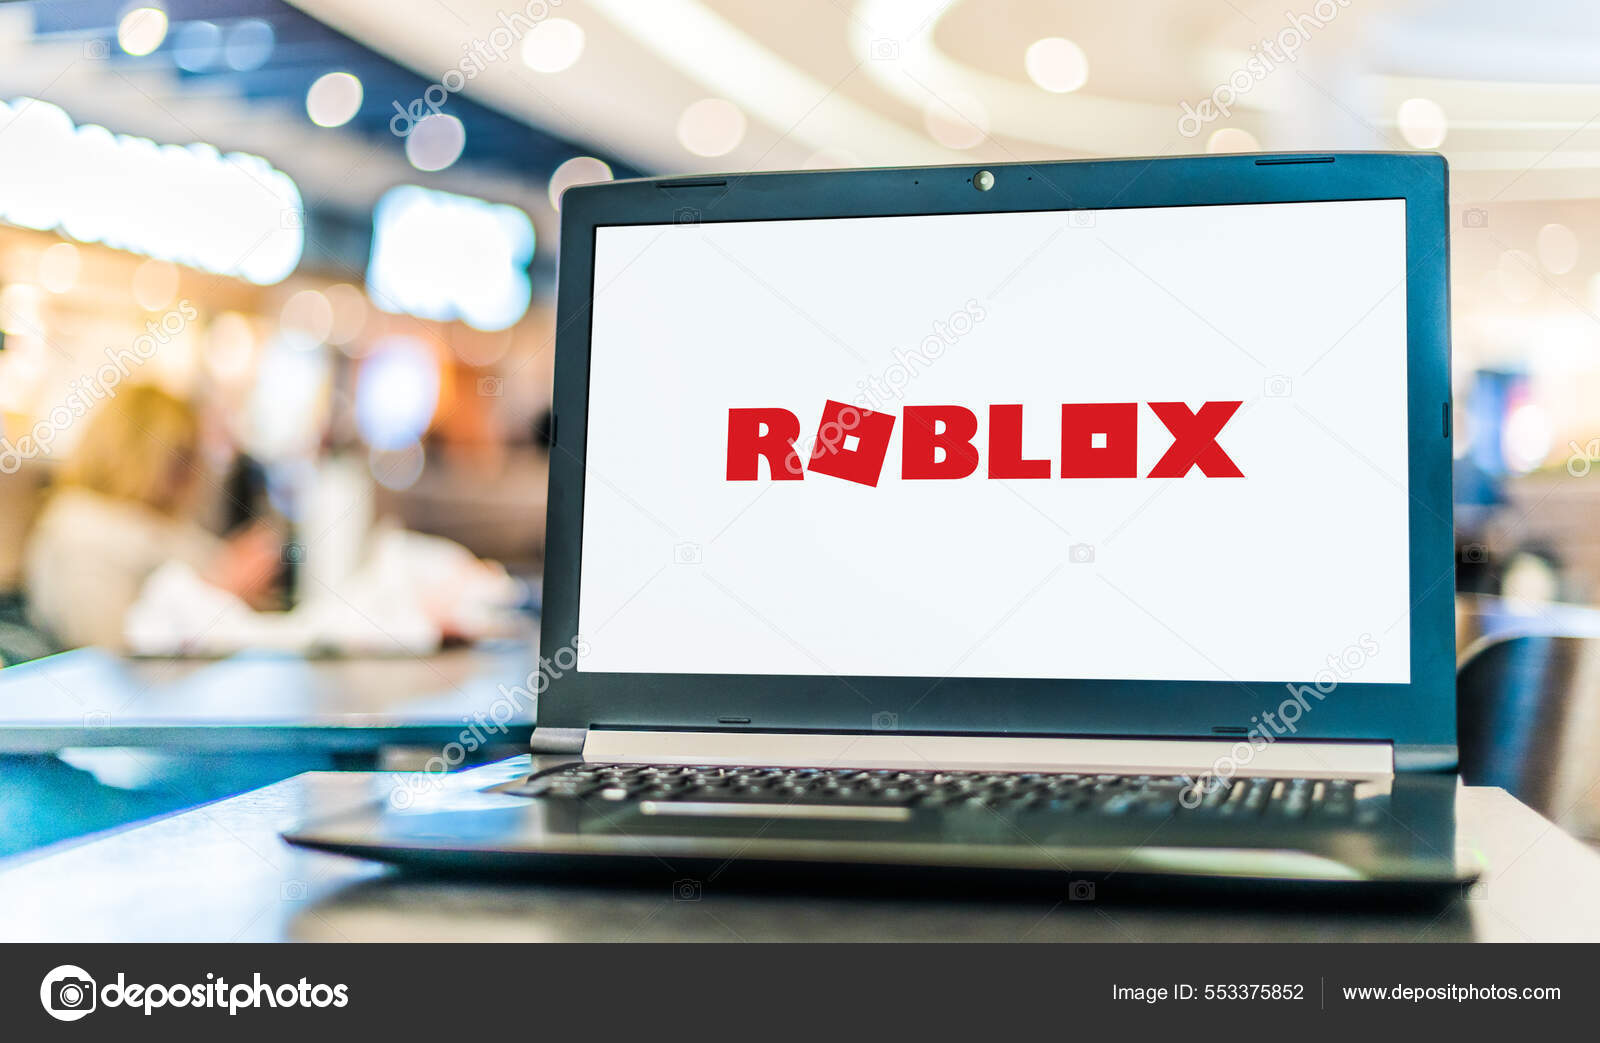 Roblox is an Online Game Platform and Game Creation System. it